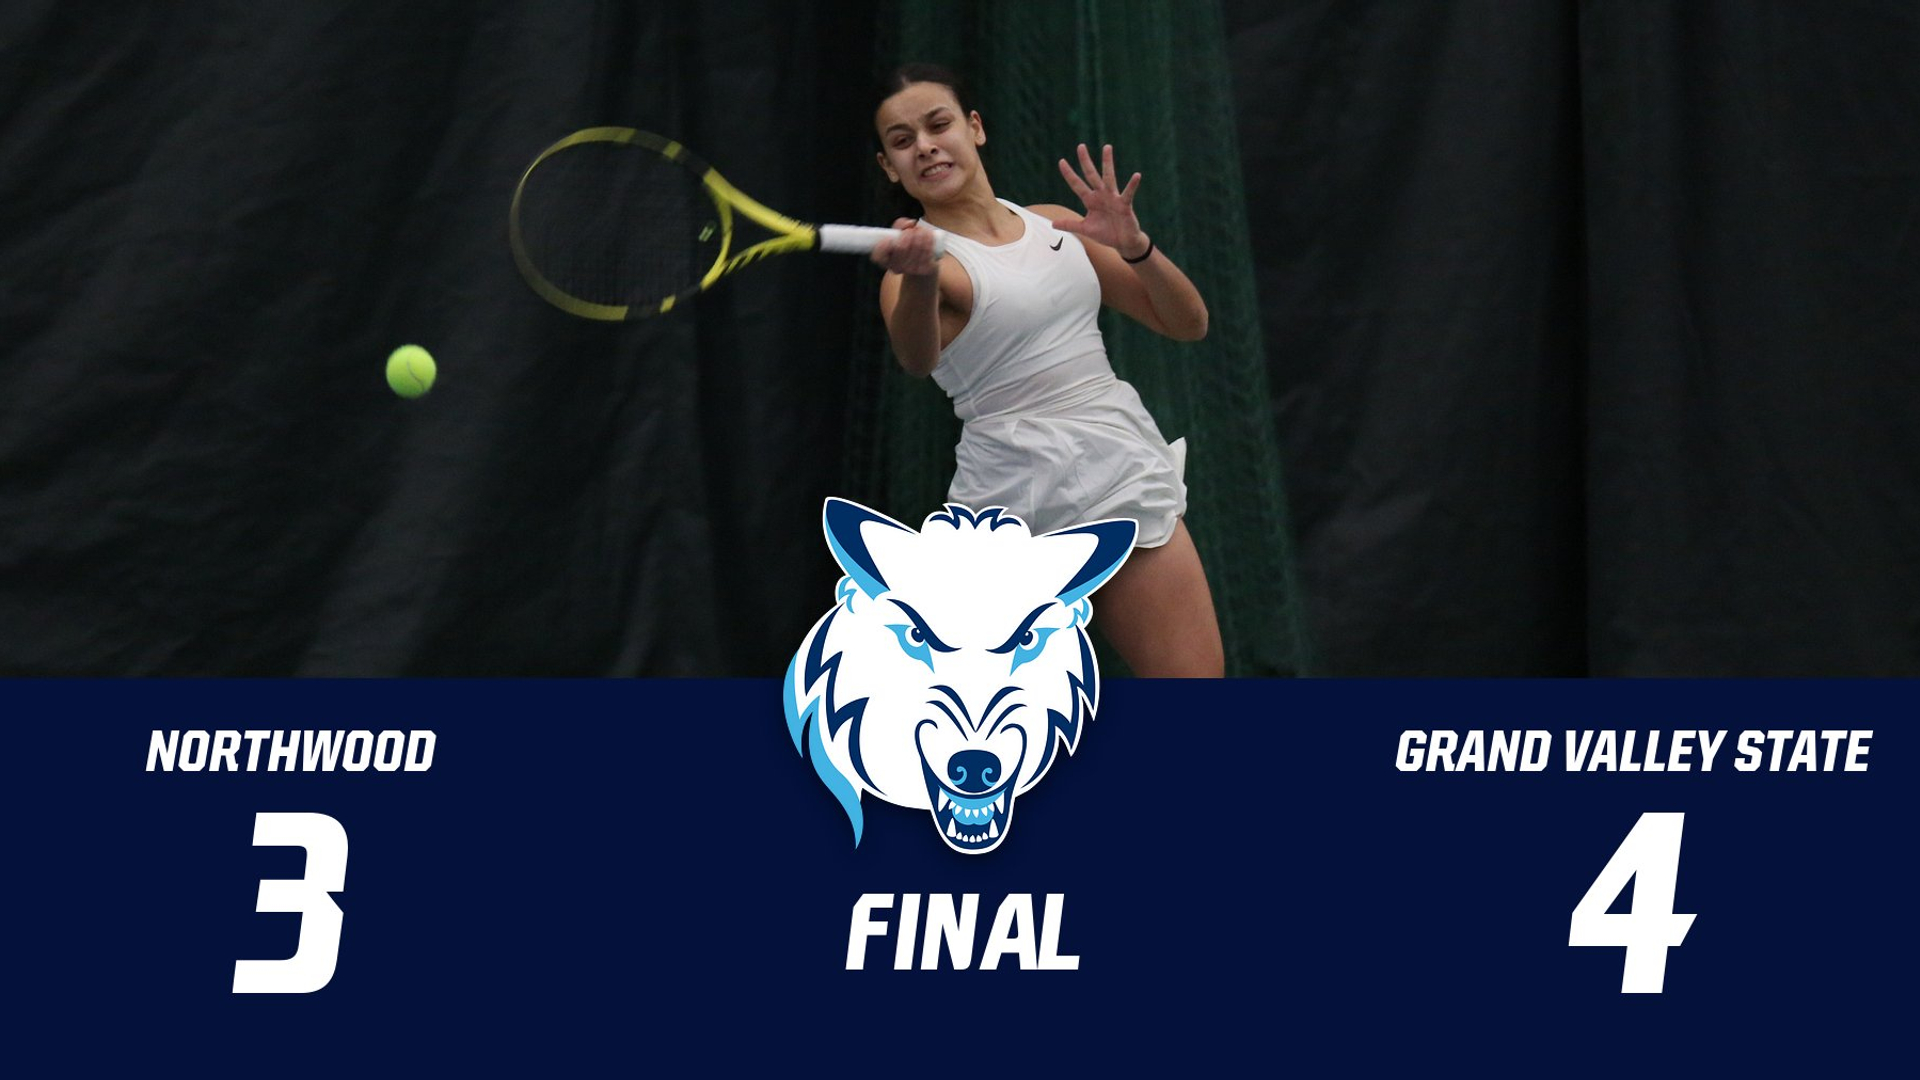 Women's Tennis Drops Hard-Fought 4-3 Match To Grand Valley State